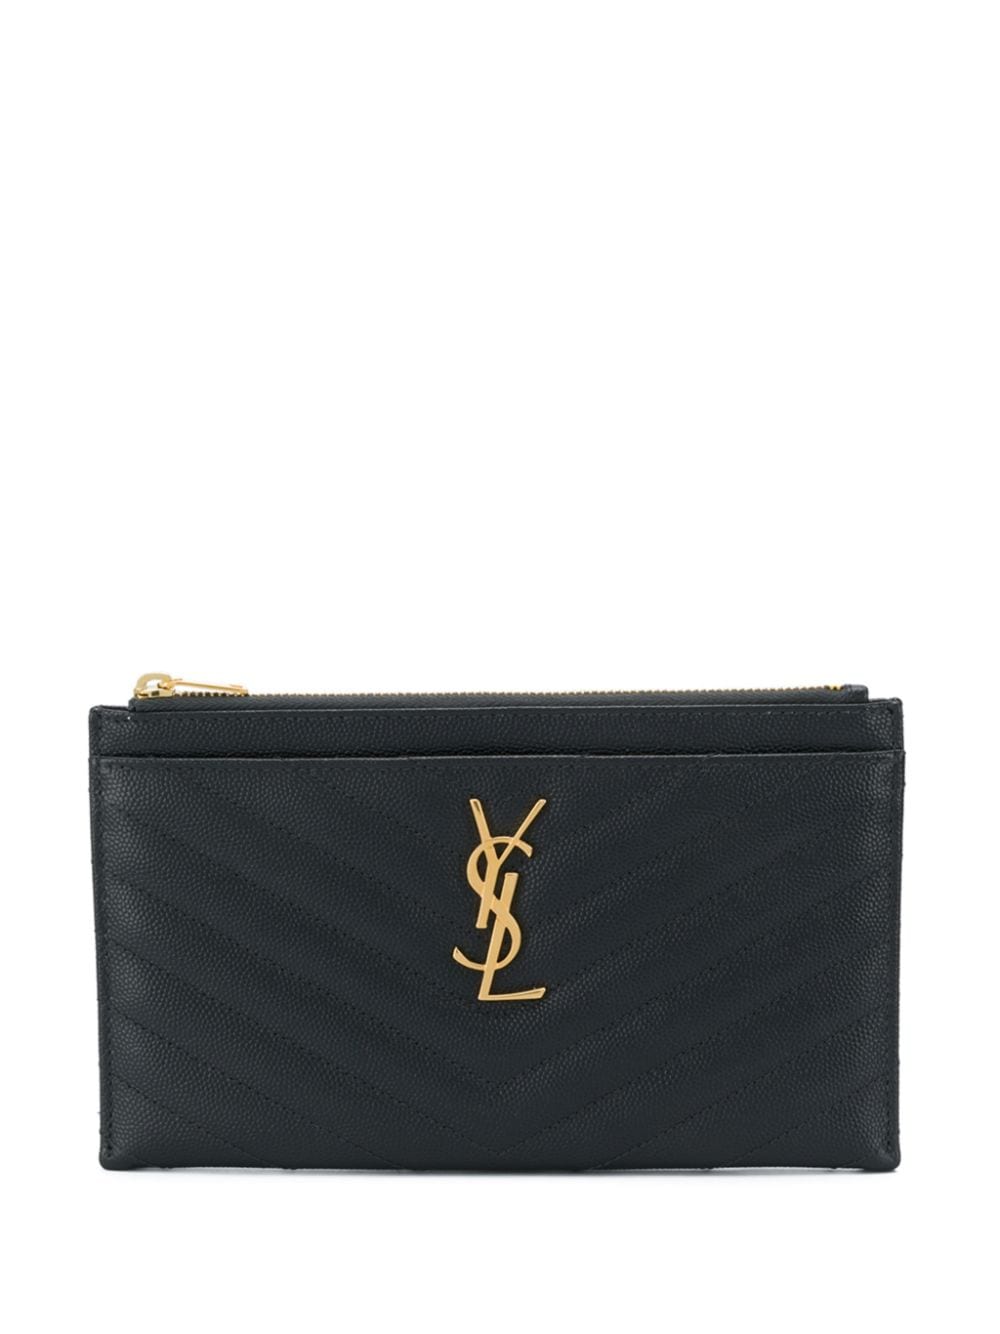 French luxury fashion house Yves Saint Laurent logo seen in